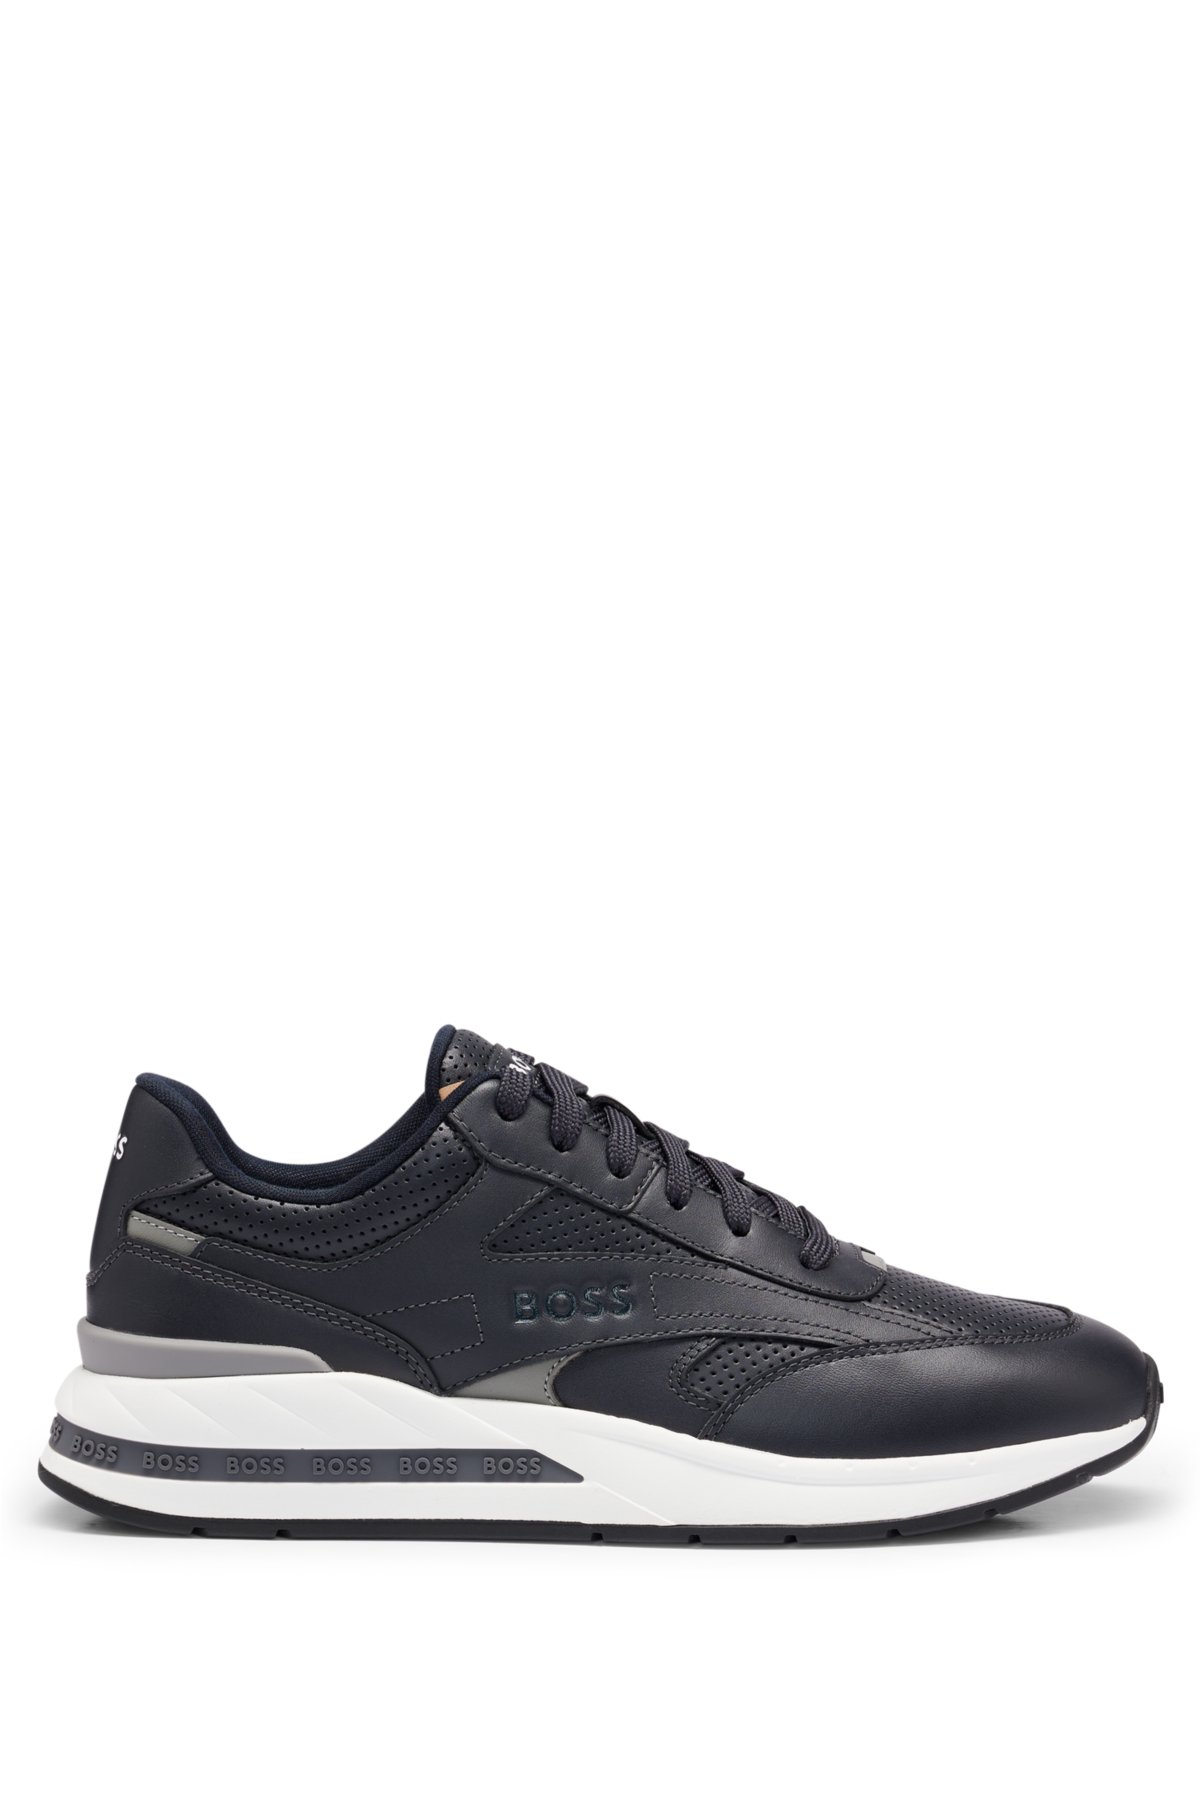 BOSS - Low-top trainers with perforated and plain leather